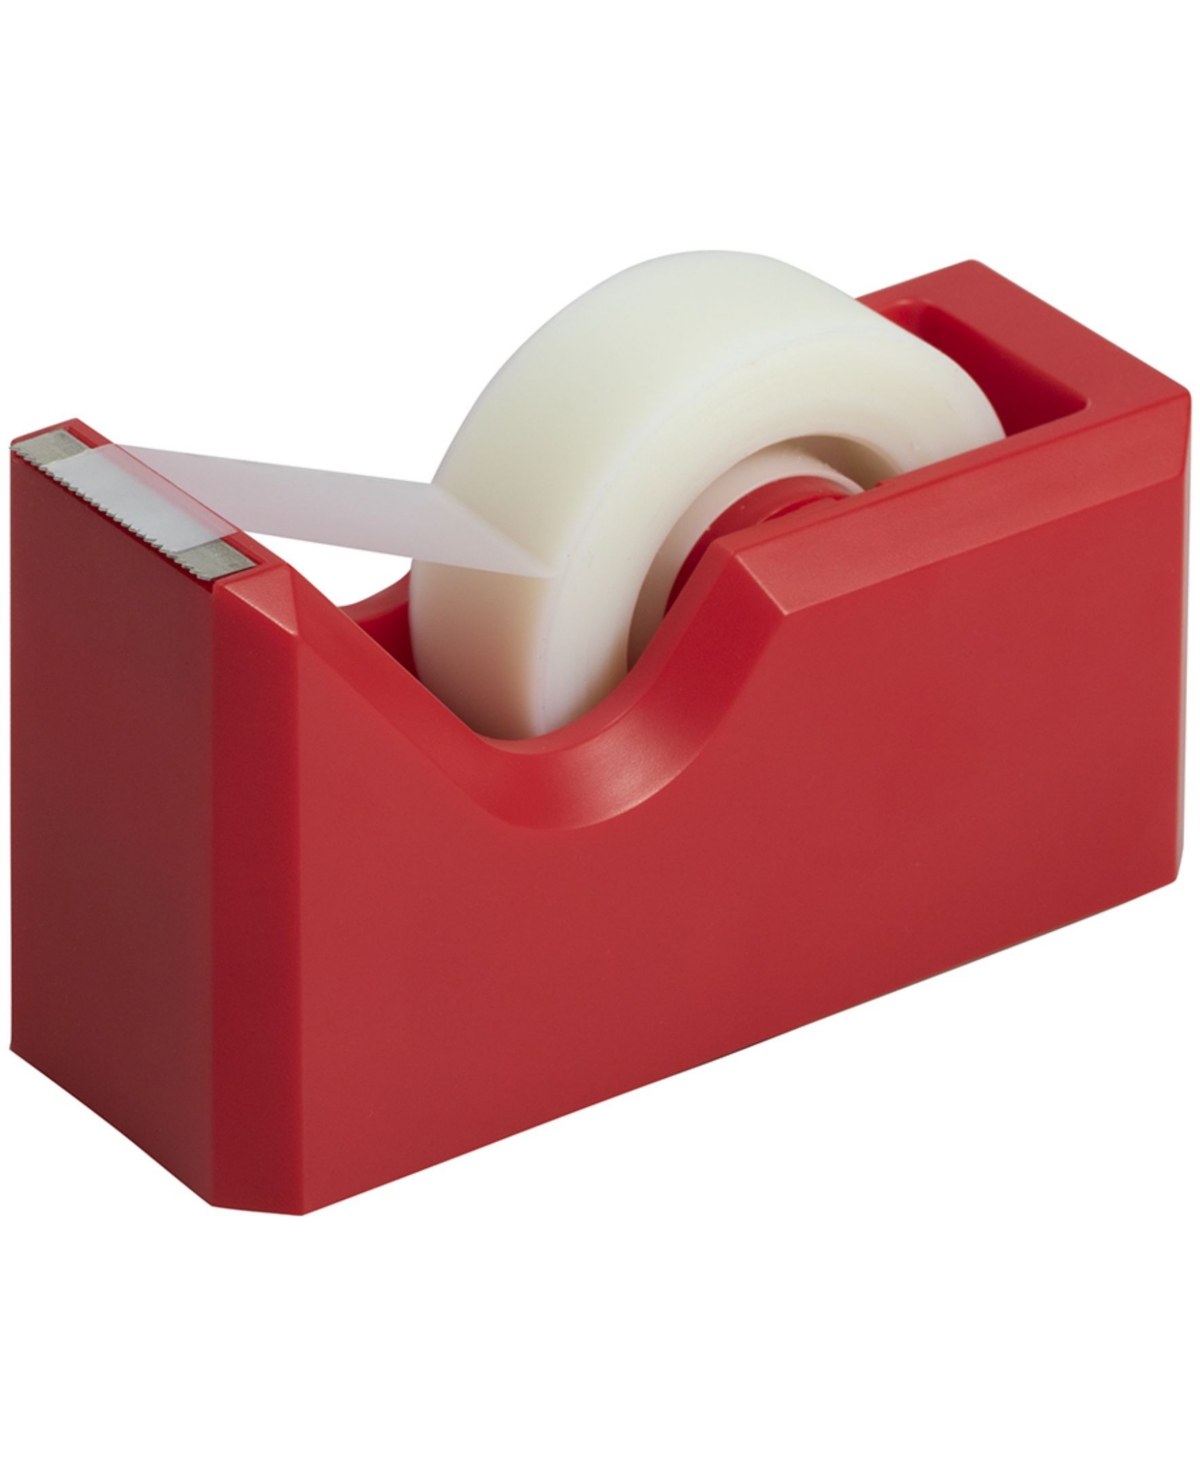 Jam Paper Colorful Desk Tape Dispensers In Red